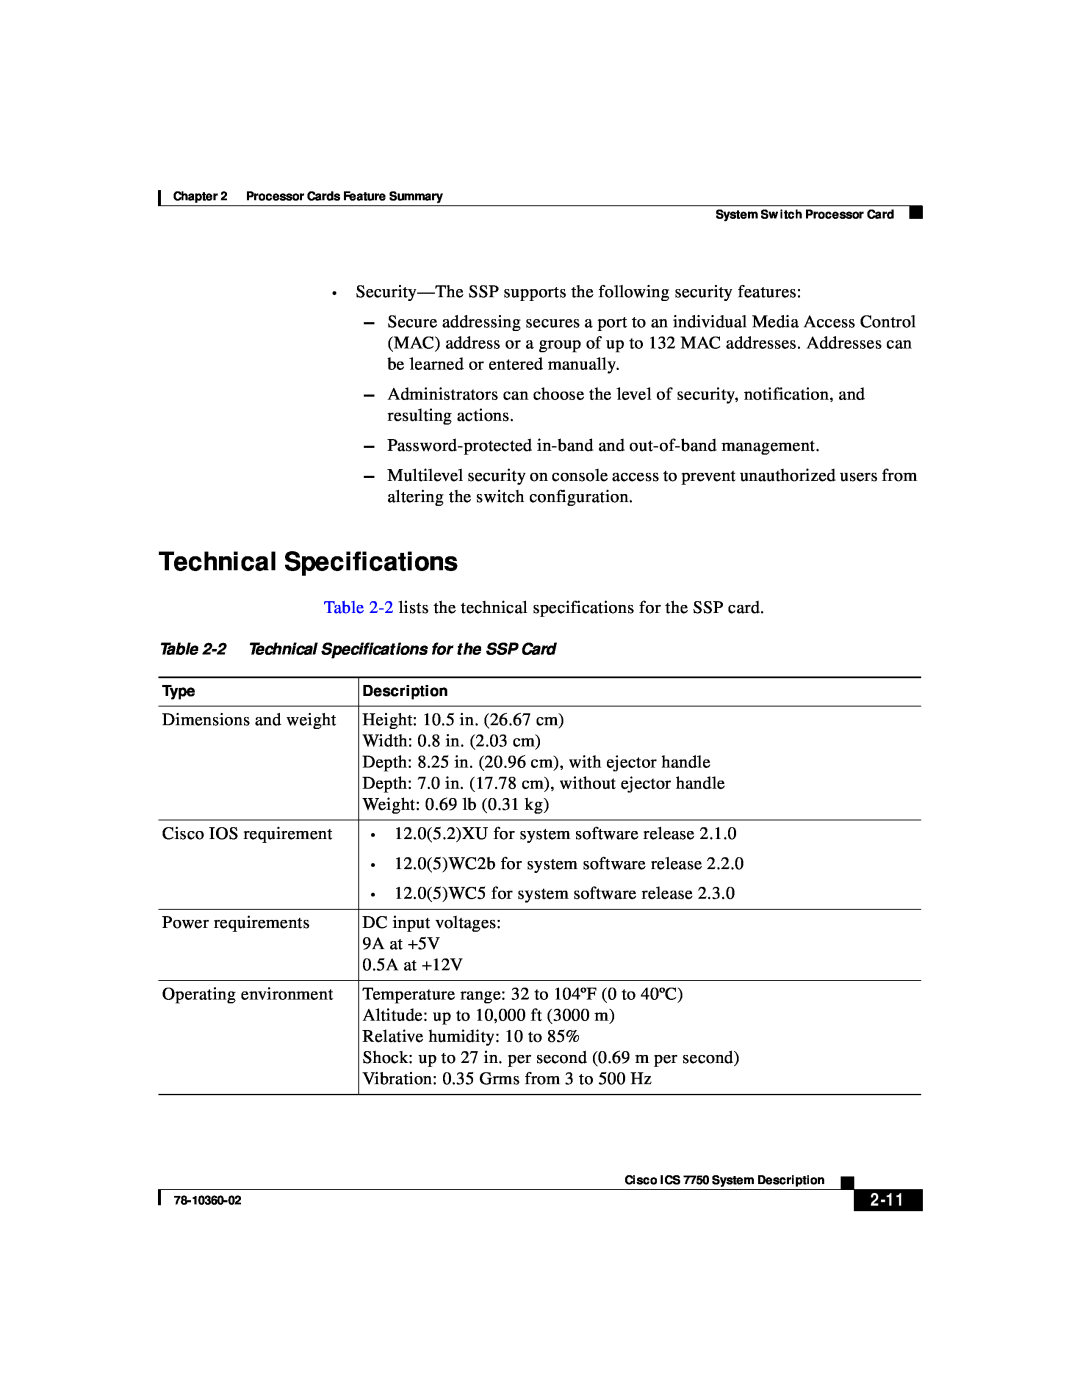 Cisco Systems ICS-7750 manual 2-11, 2 Technical Specifications for the SSP Card 